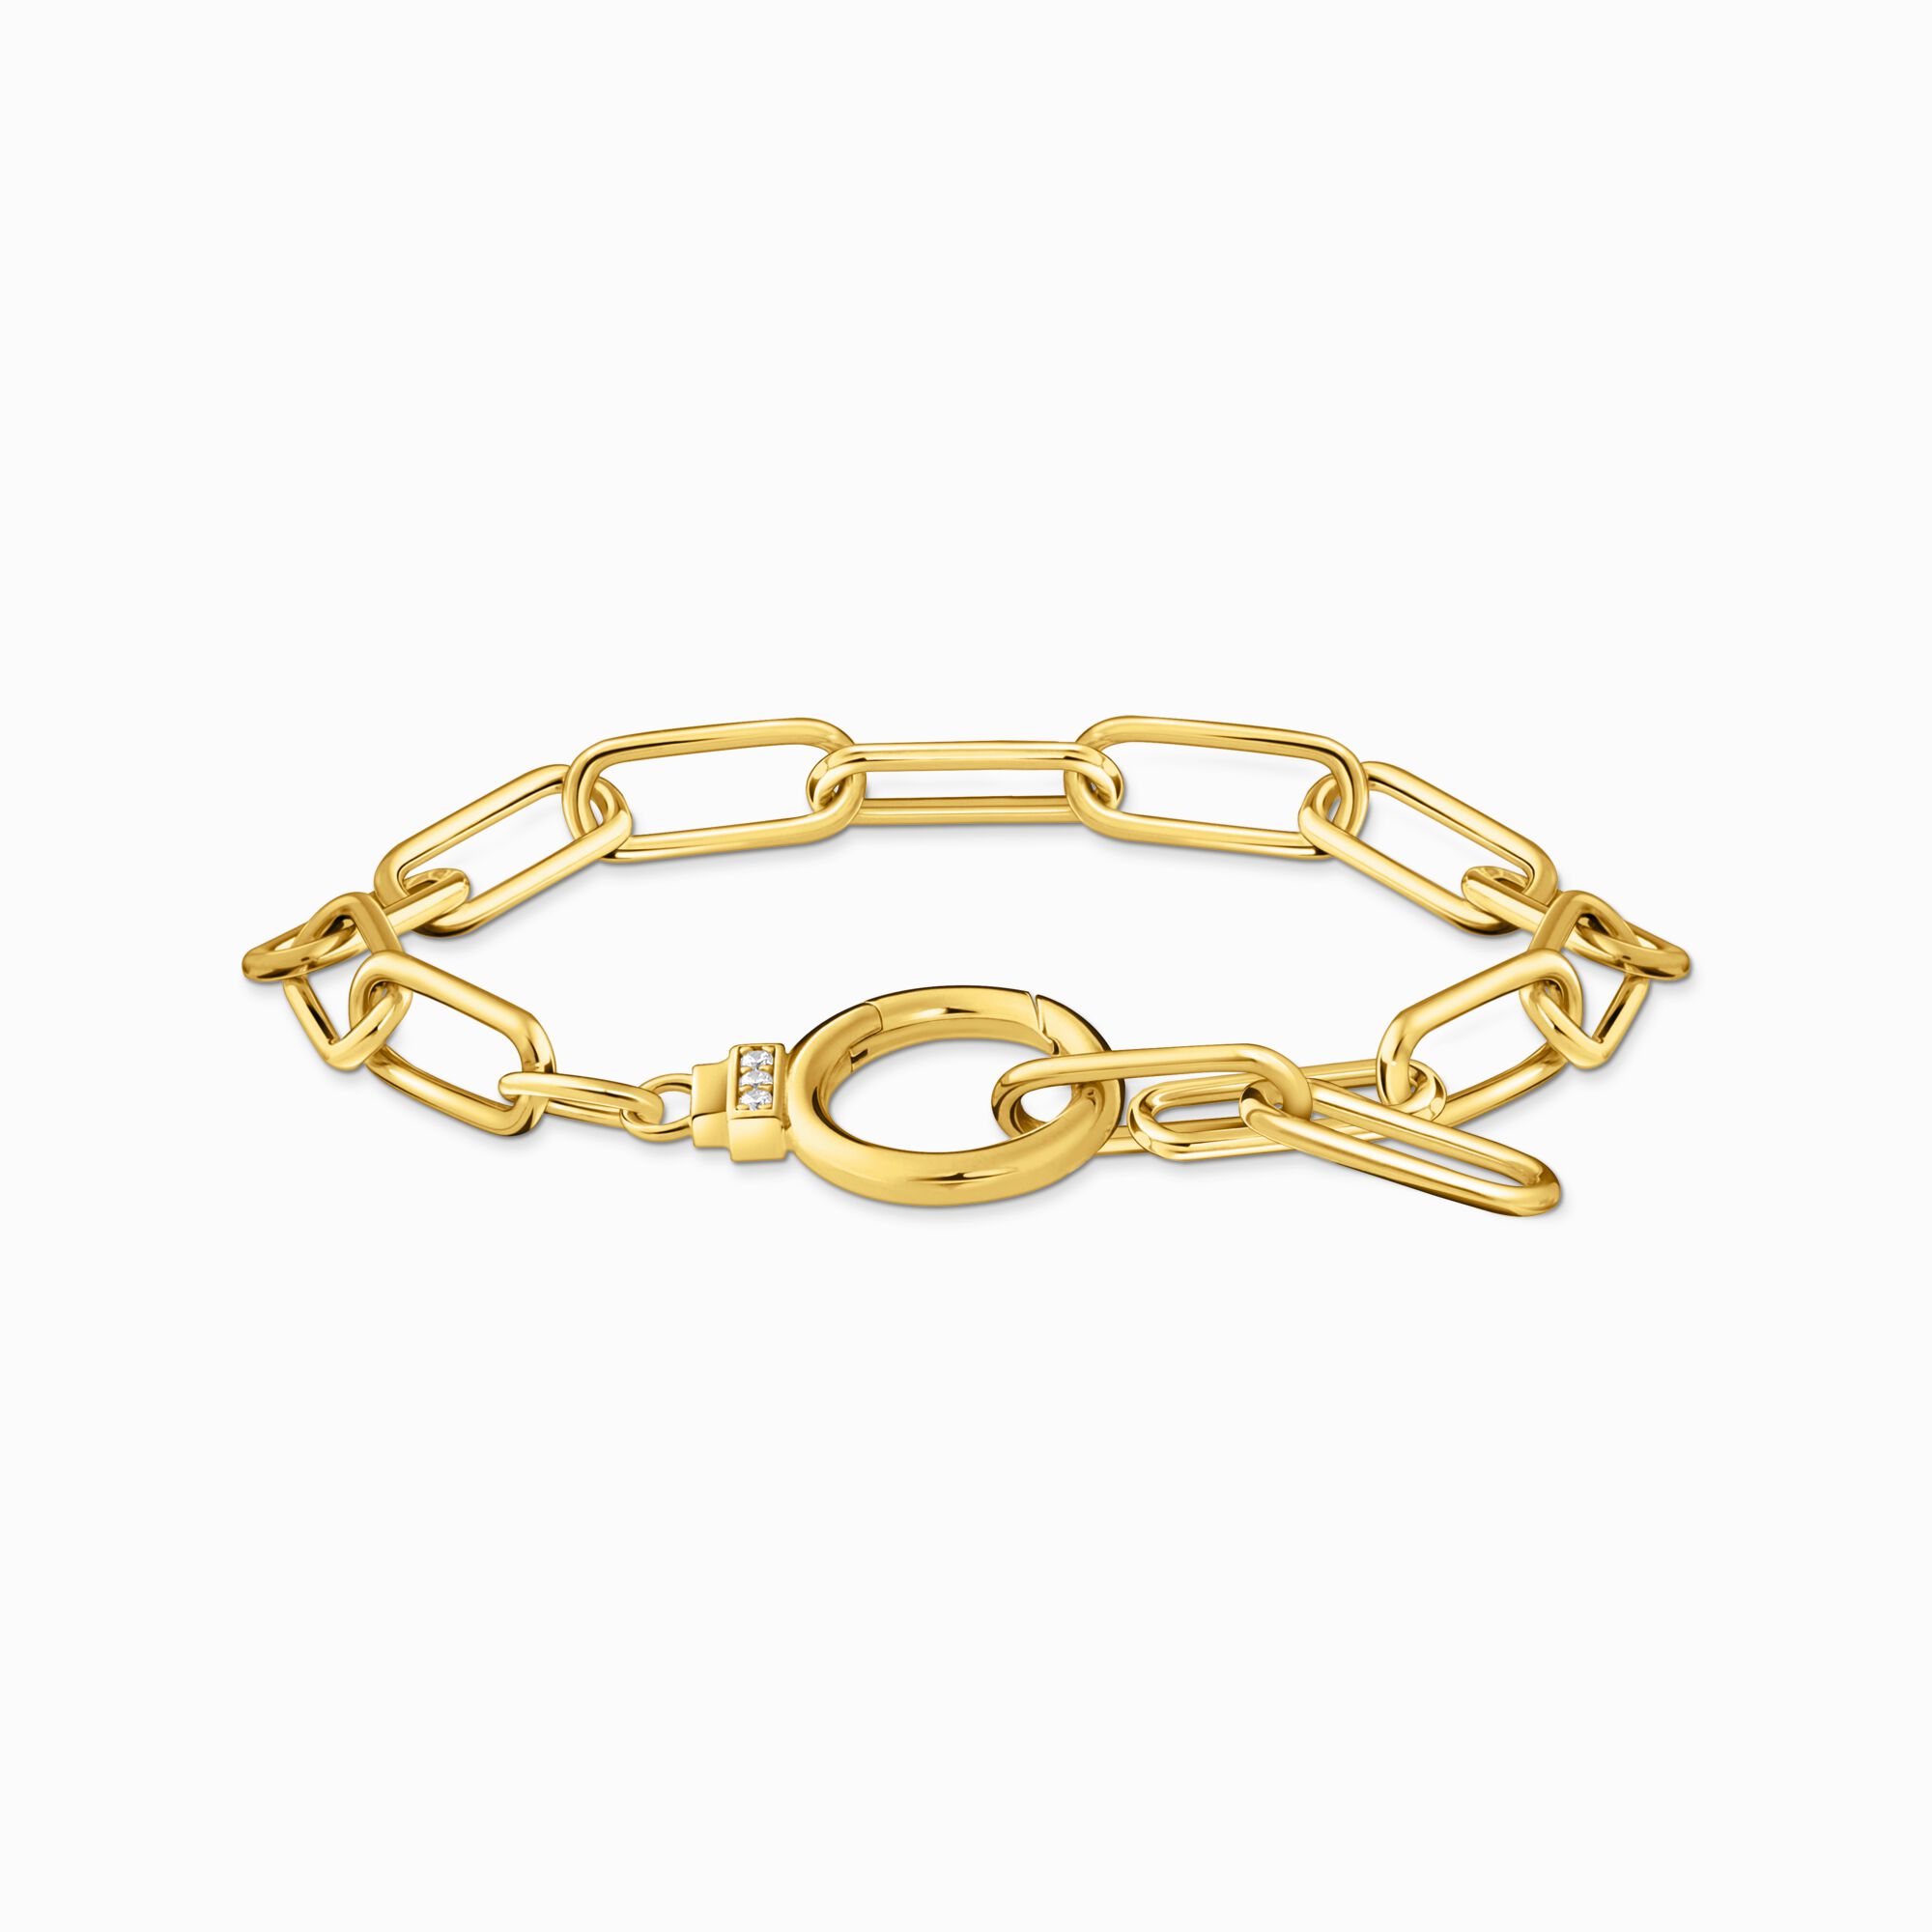 THOMAS SABO Yellow-gold plated link bracelet with zirconia and ring clasp A2133-414-14